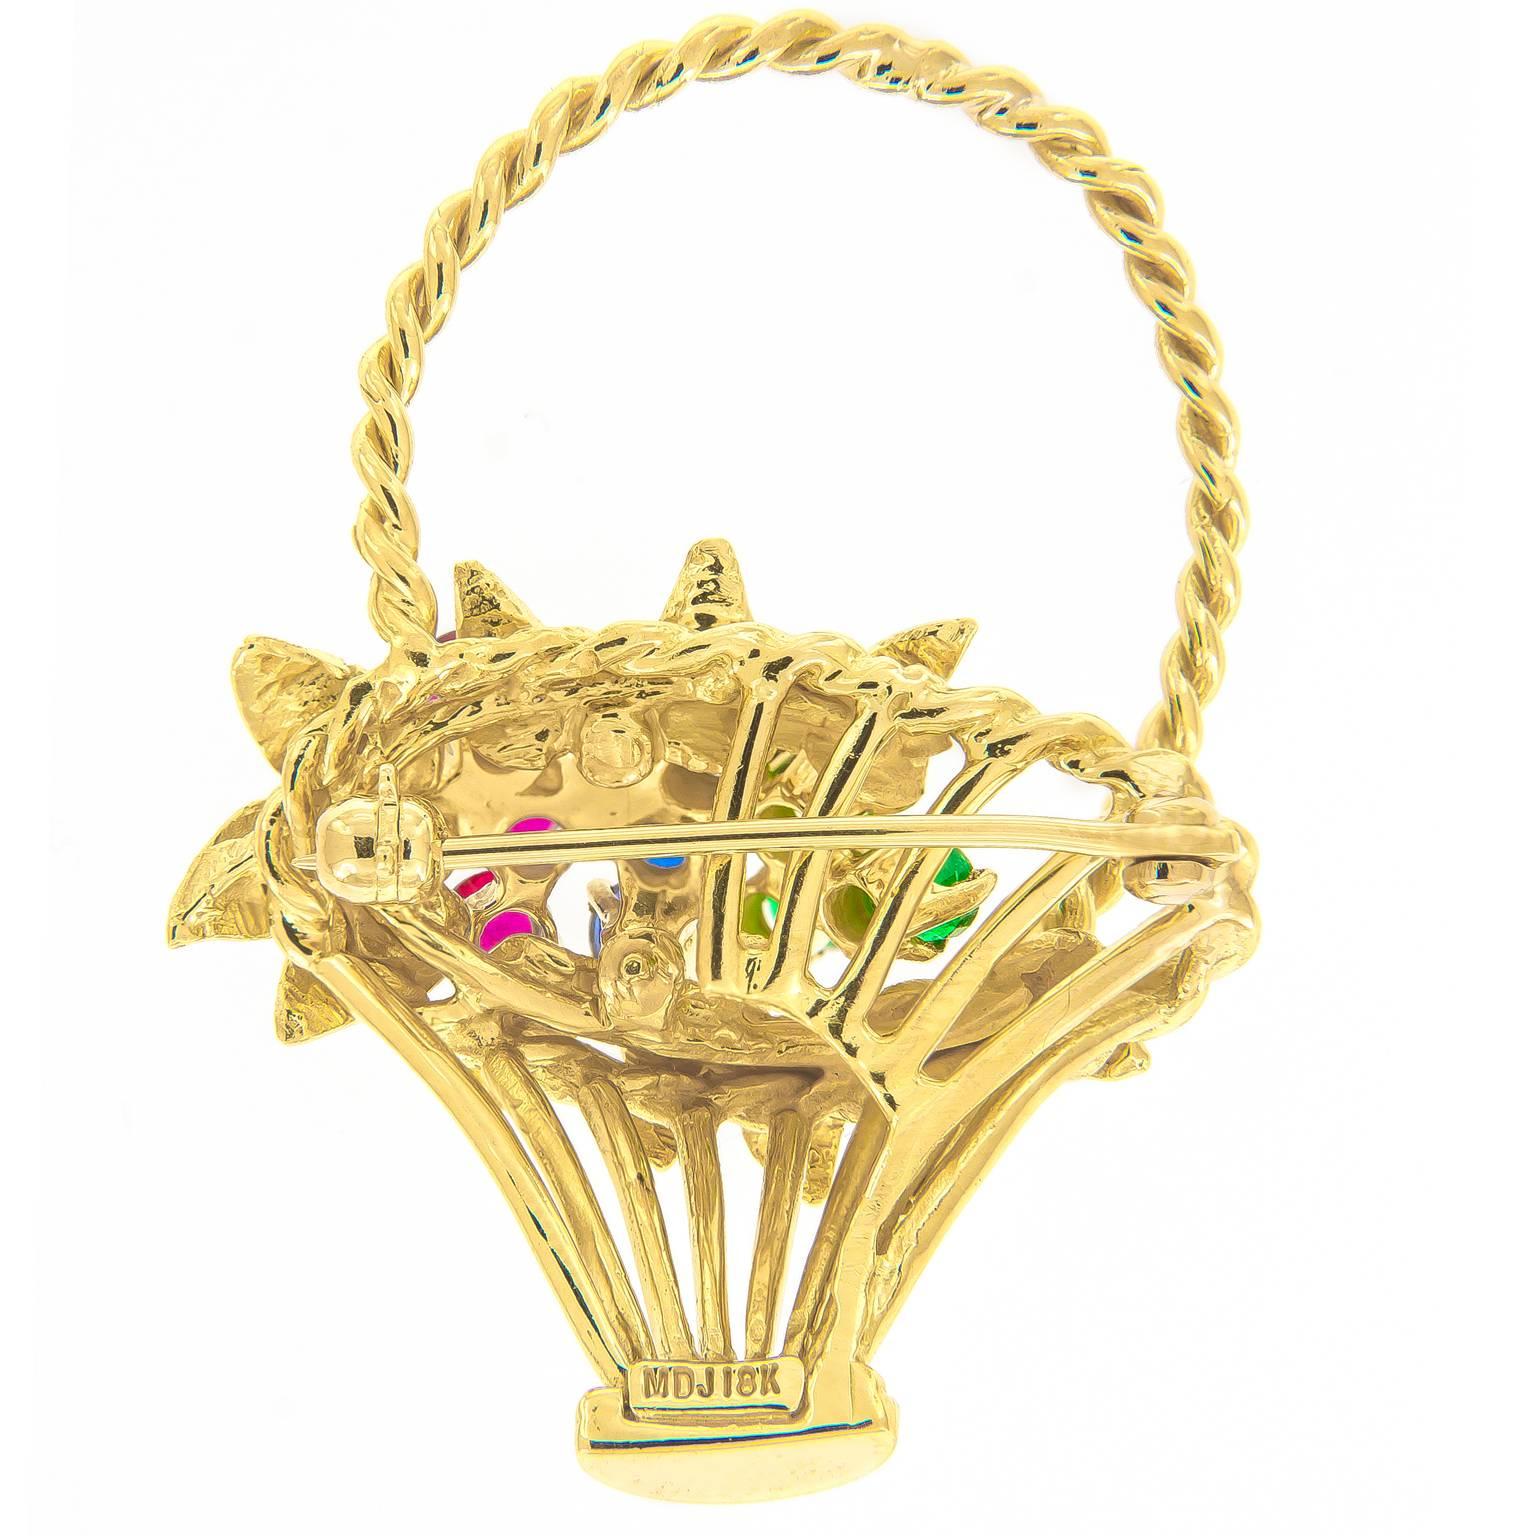 This pretty vintage flower basket brooch is exceptionally executed in 18k yellow gold and features flowers compromised of rubies, blue sapphires and emeralds.